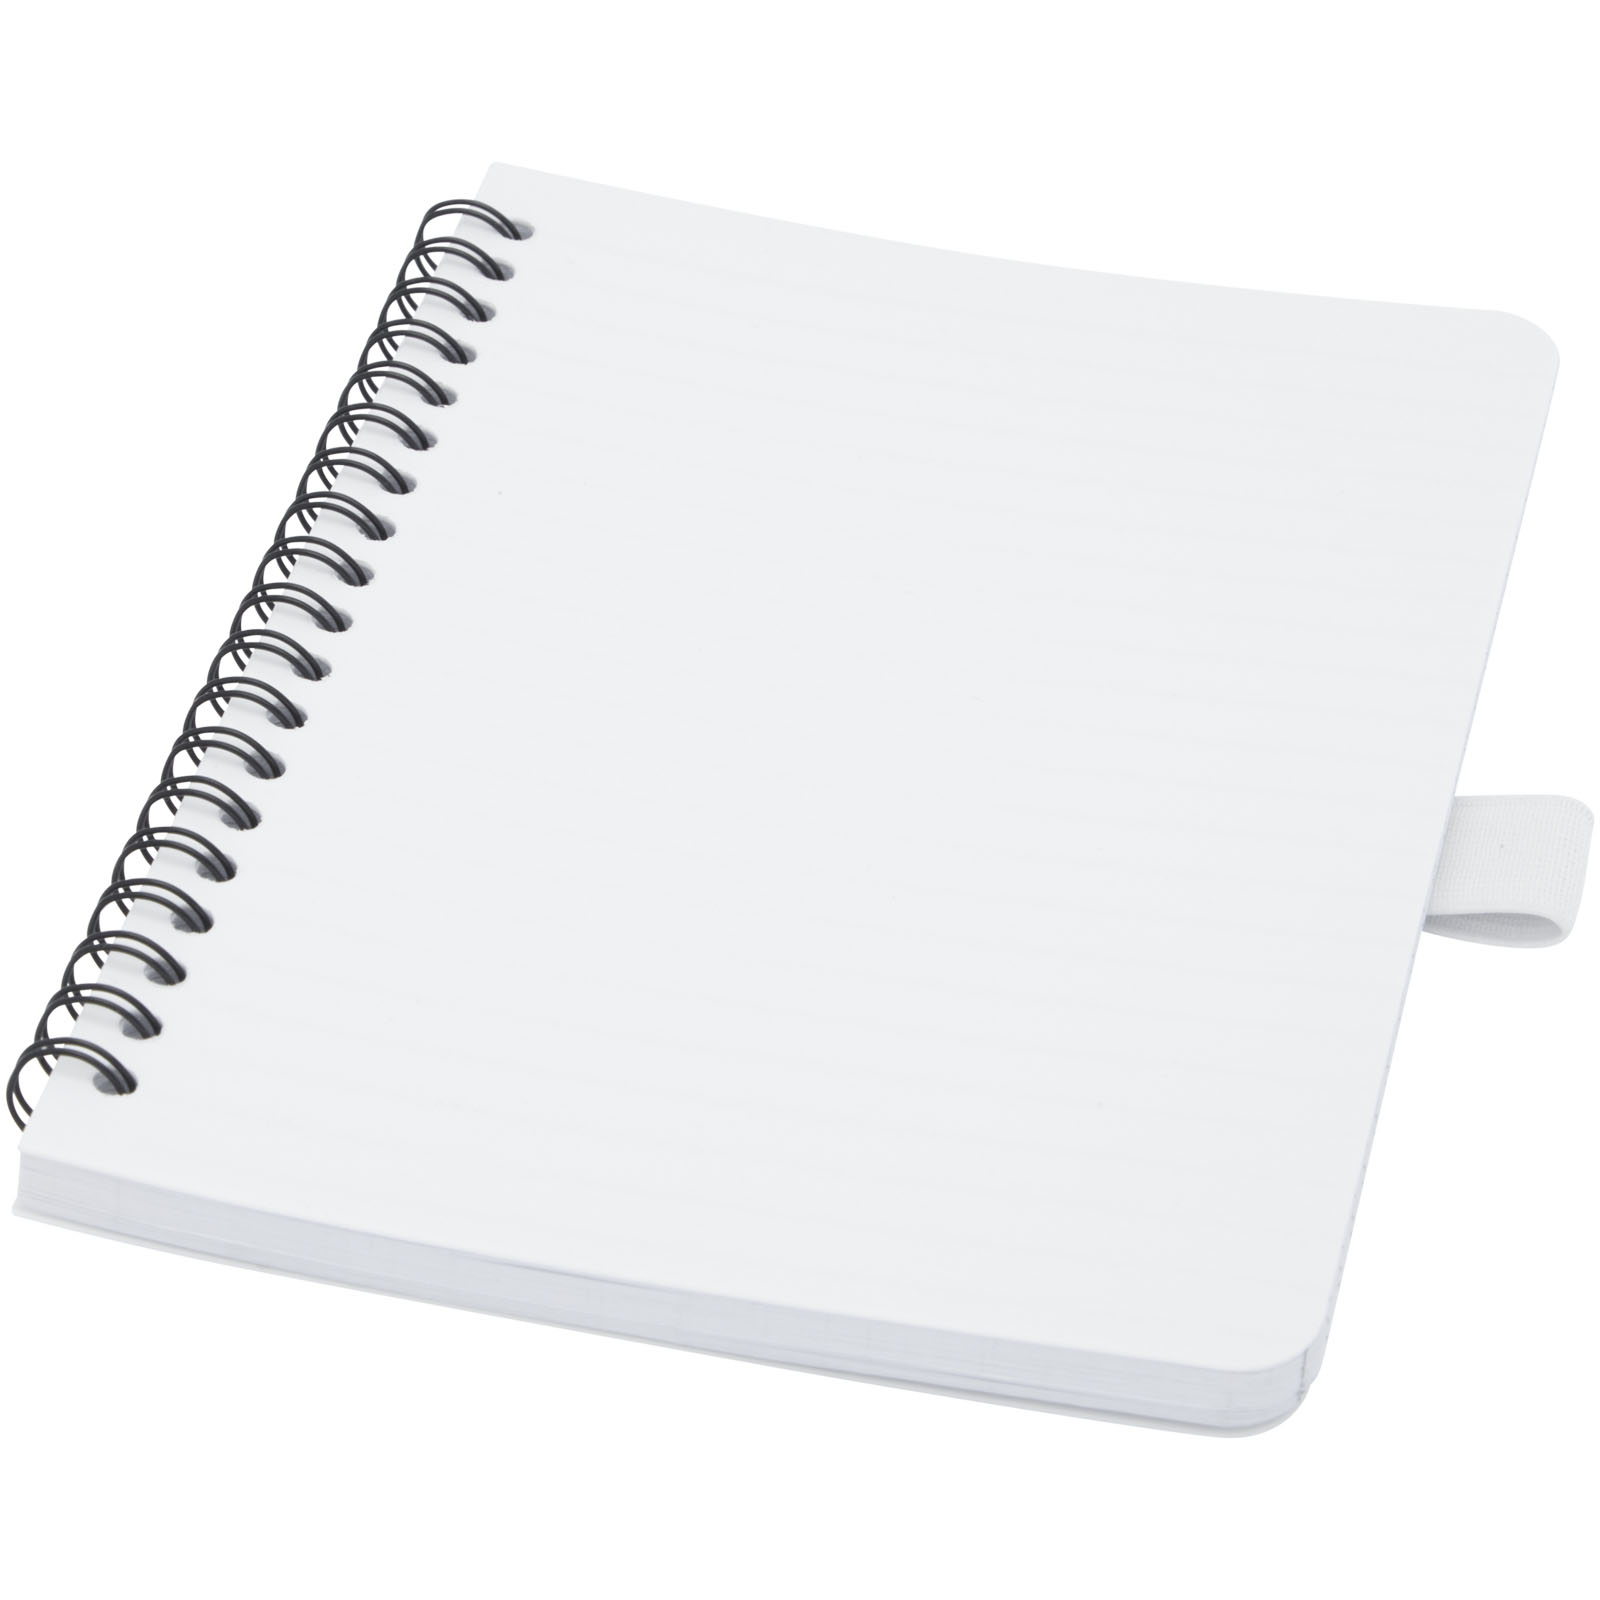 Notebook with Silver Nano Powder that has Anti-Microbial properties - Grays